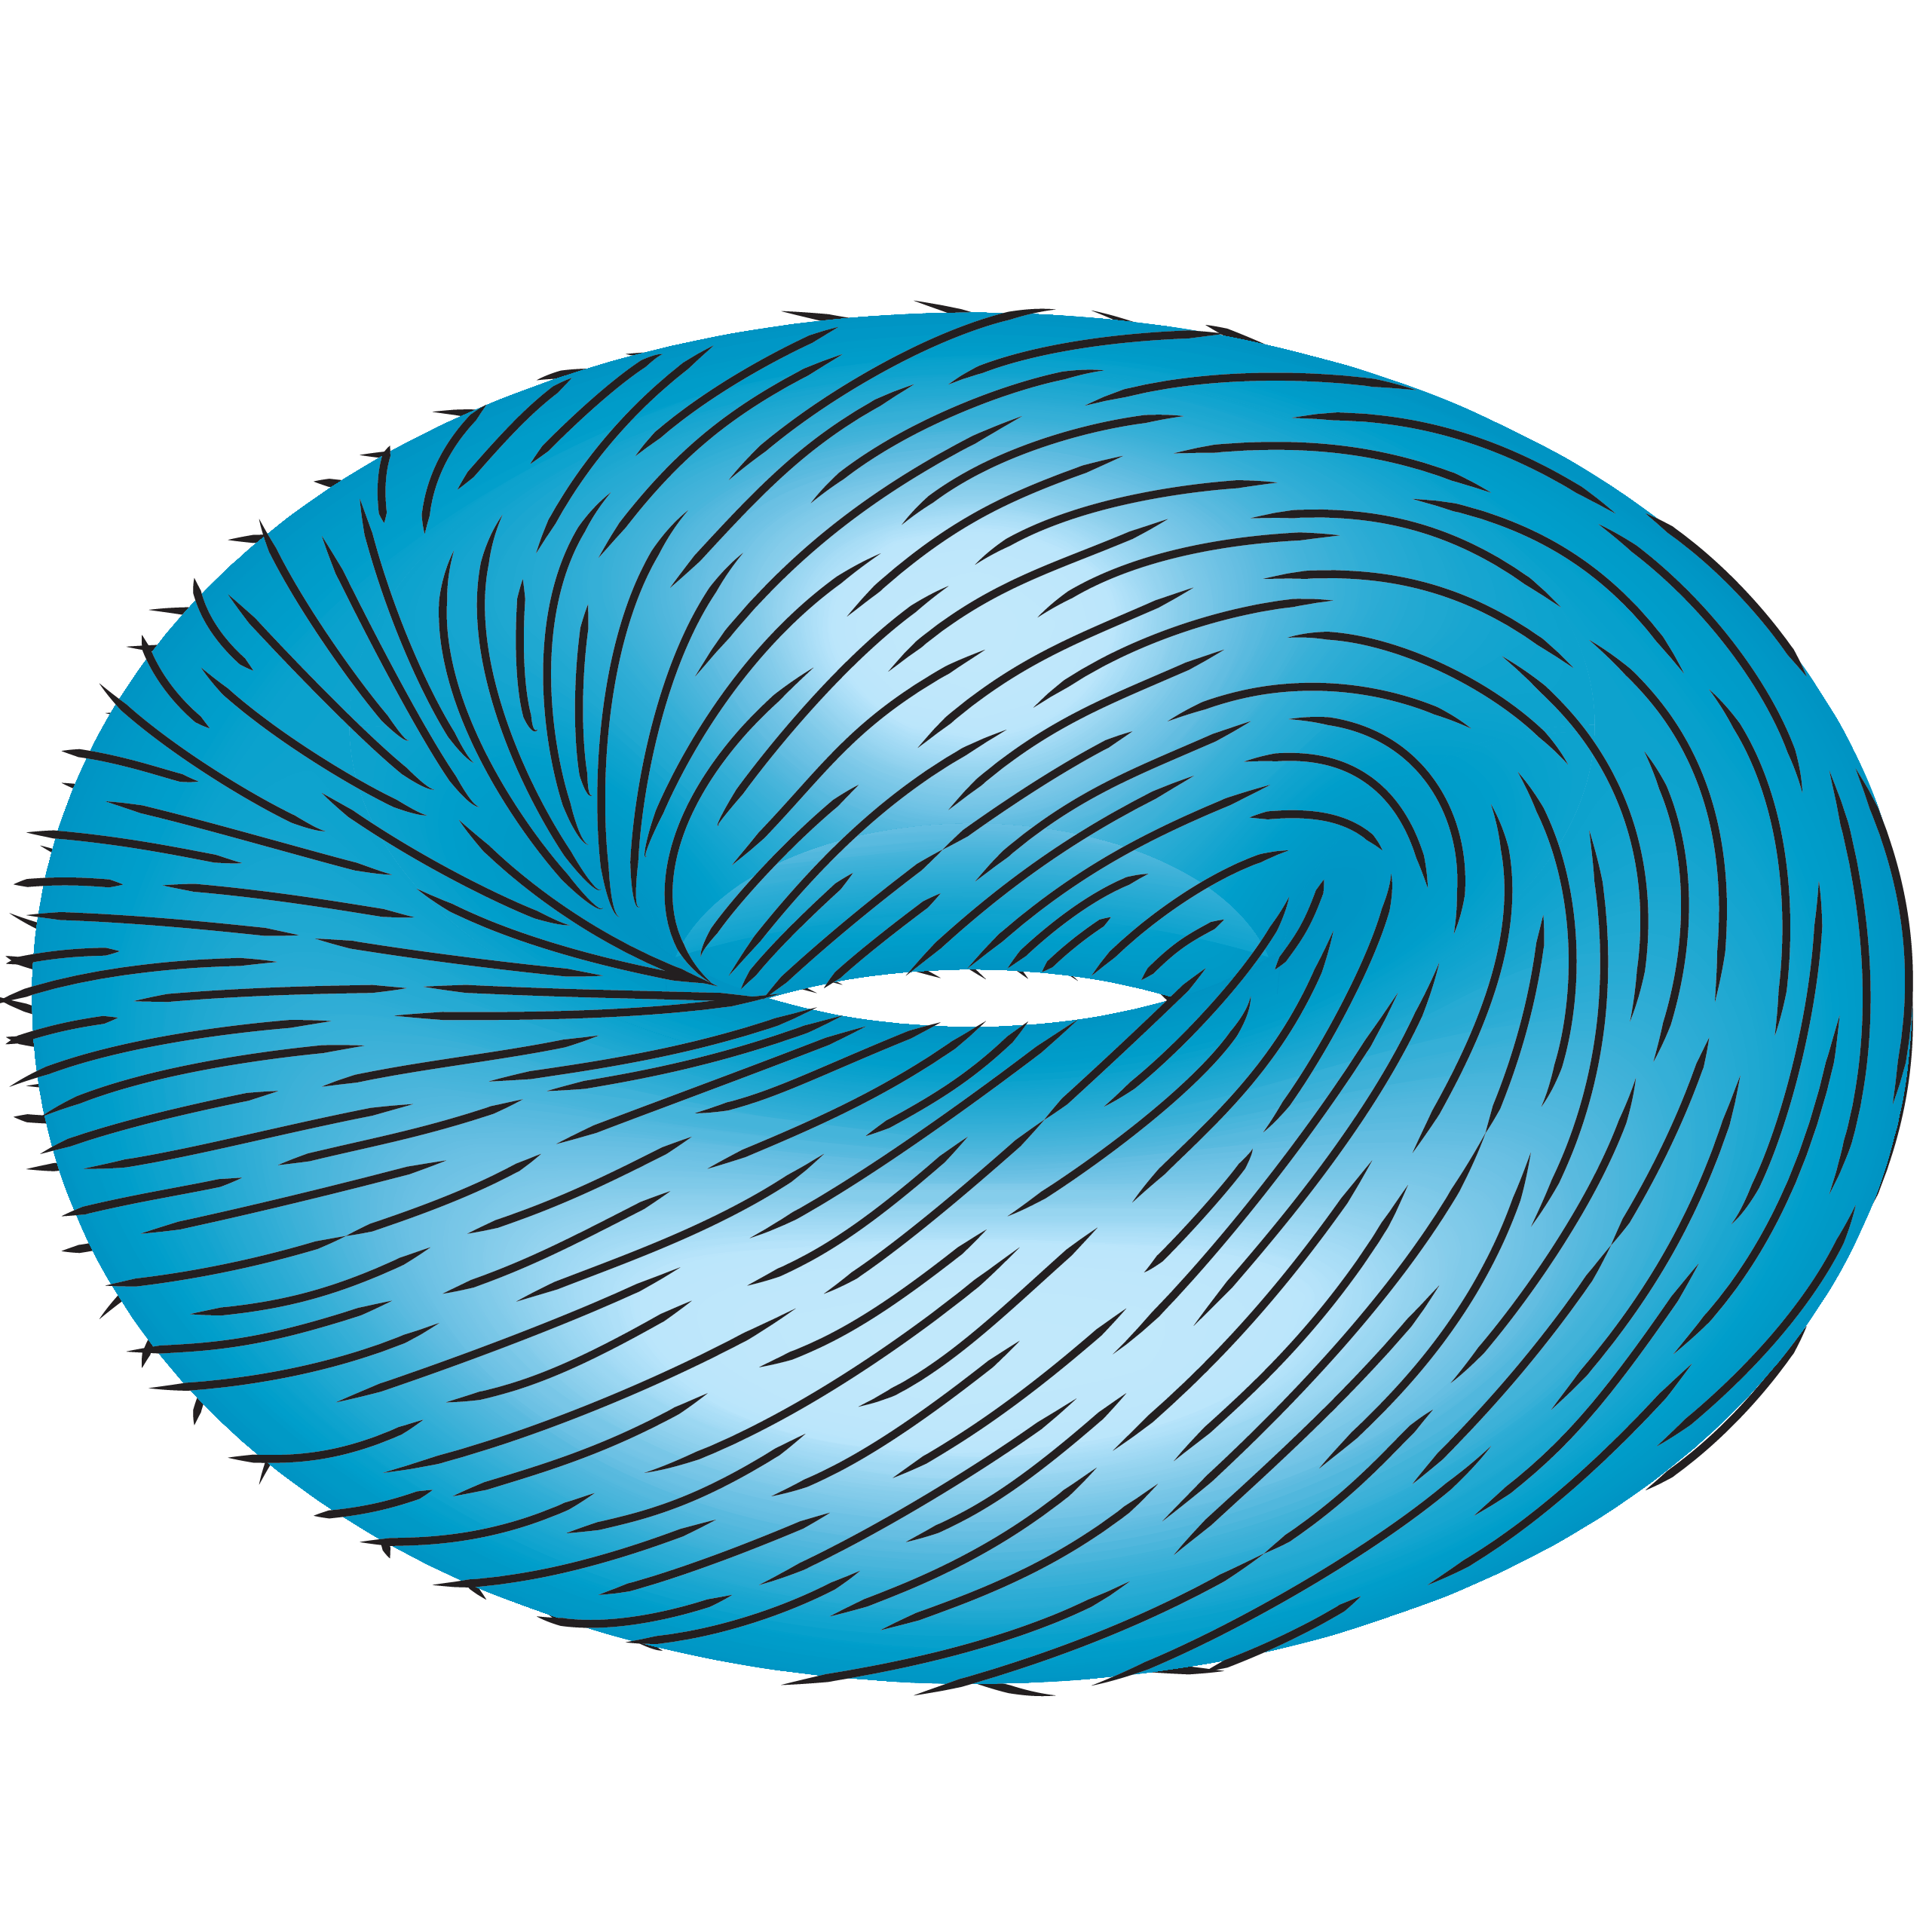 Graphic shows a doughnut shape covered in small lines resembling hairs that are all combed in the same direction, with no tufts resulting.